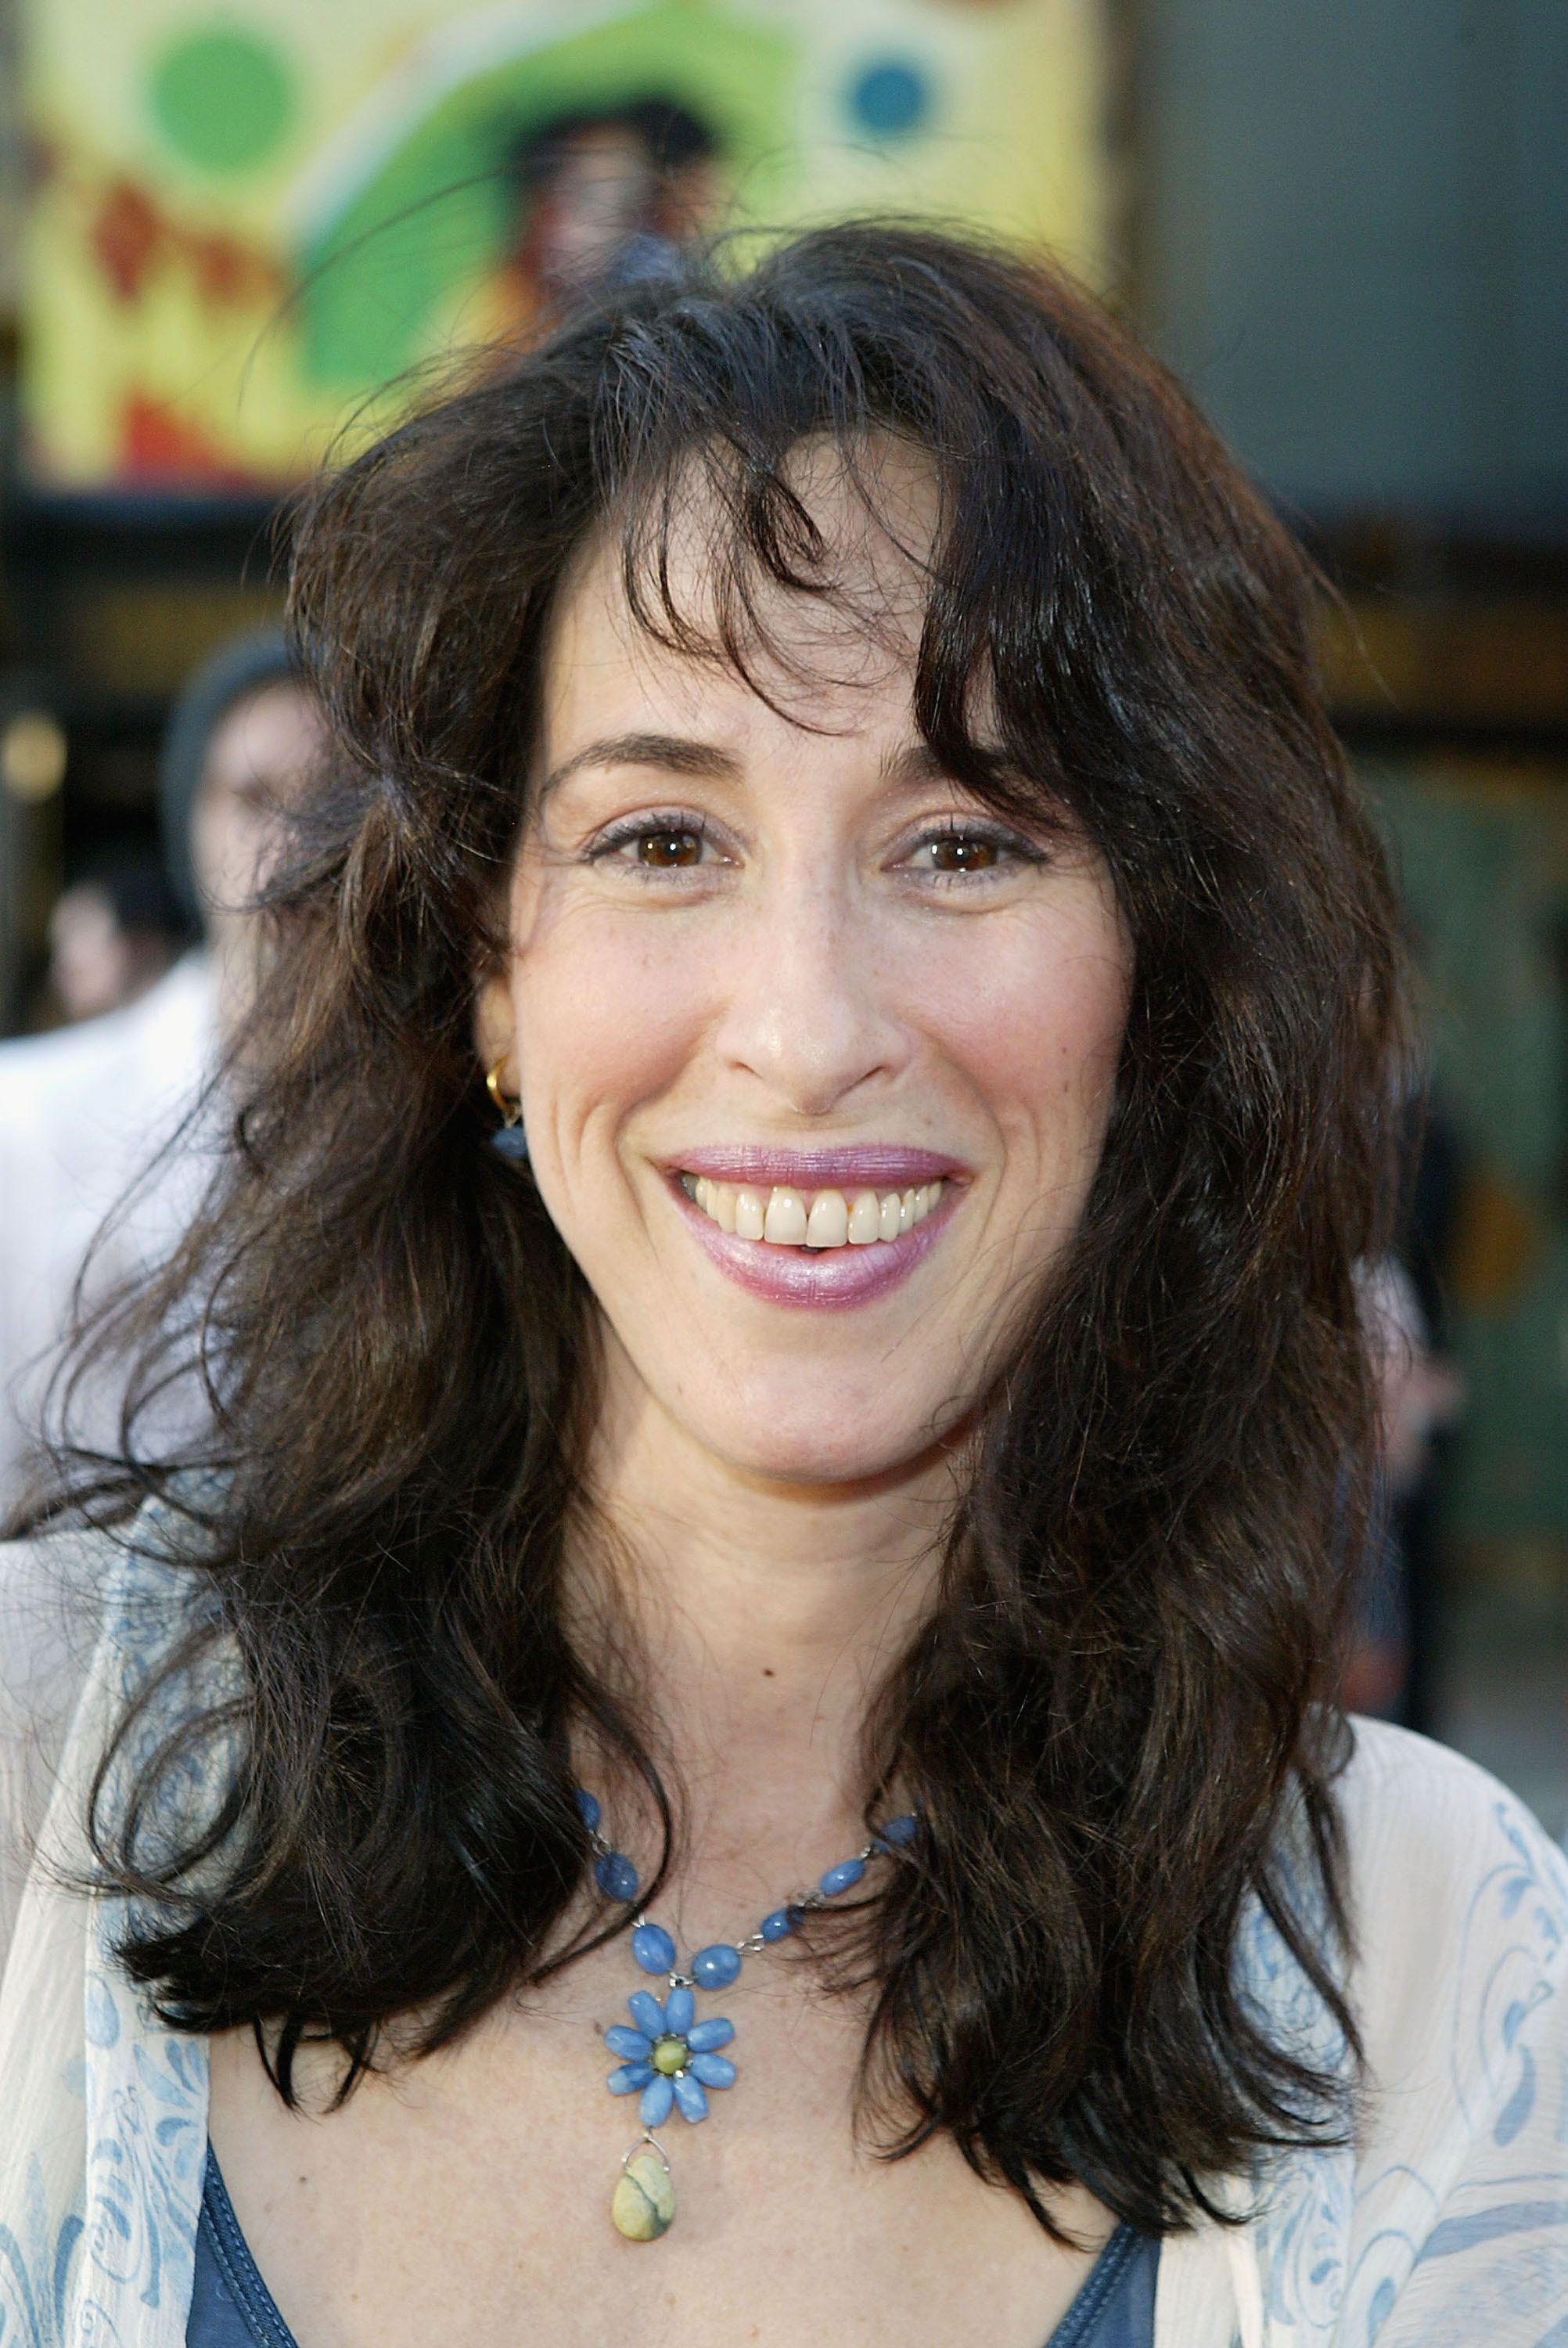 L'actrice Maggie Wheeler au Grauman's Chinese Theatre, à Hollywood, en Californie. | Photo : Getty Images